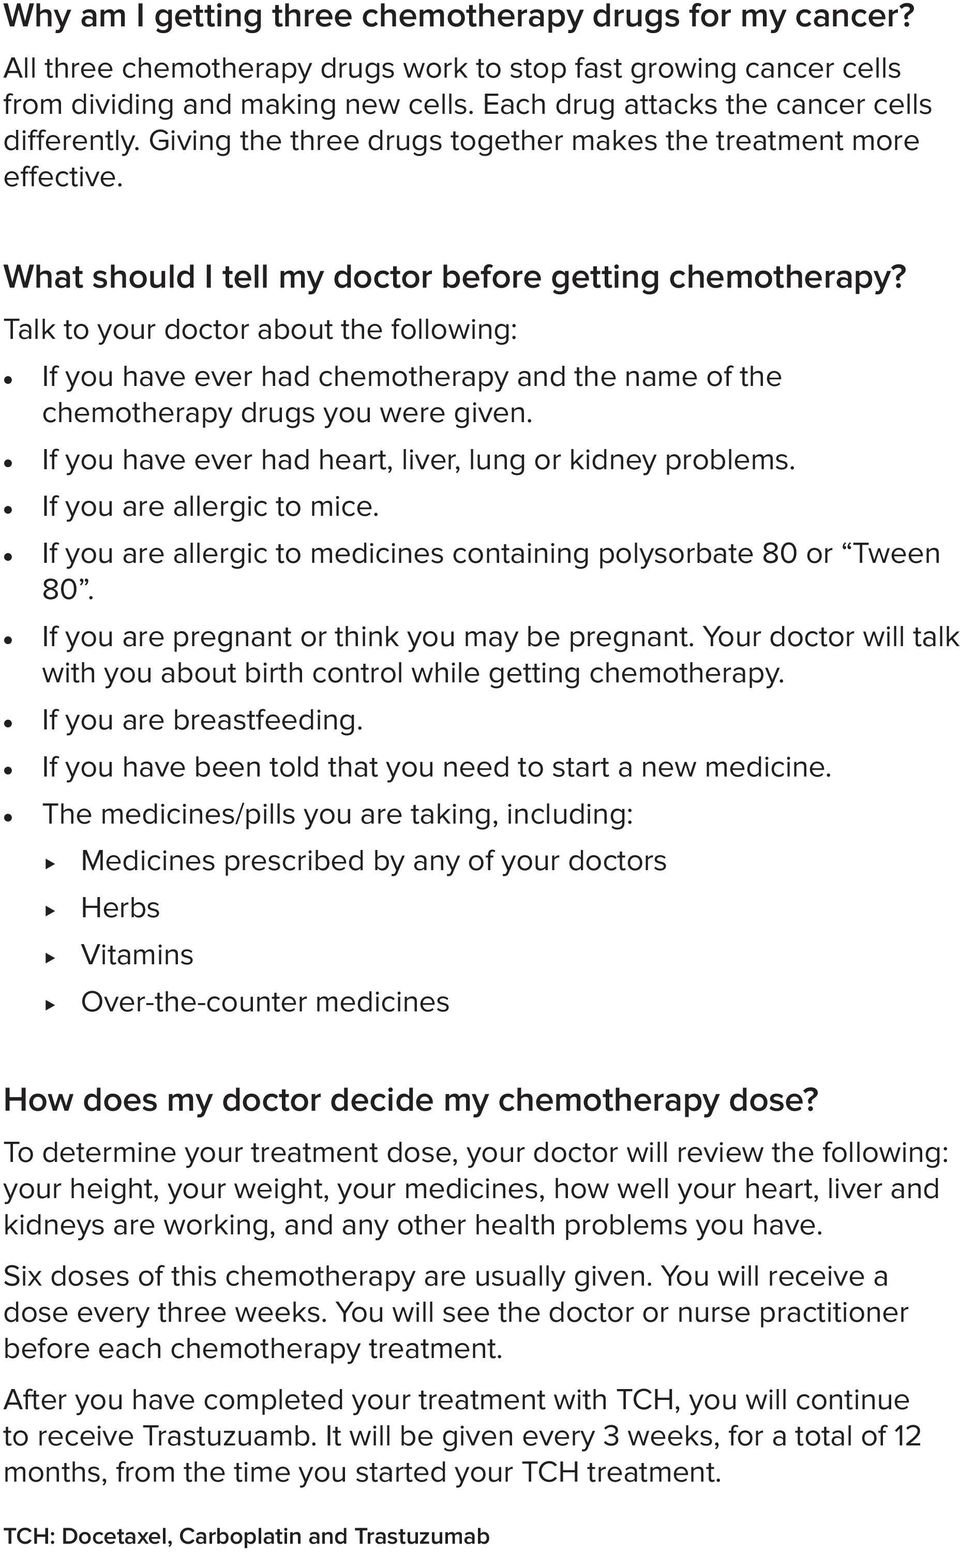 Talk to your doctor about the following: If you have ever had chemotherapy and the name of the chemotherapy drugs you were given. If you have ever had heart, liver, lung or kidney problems.